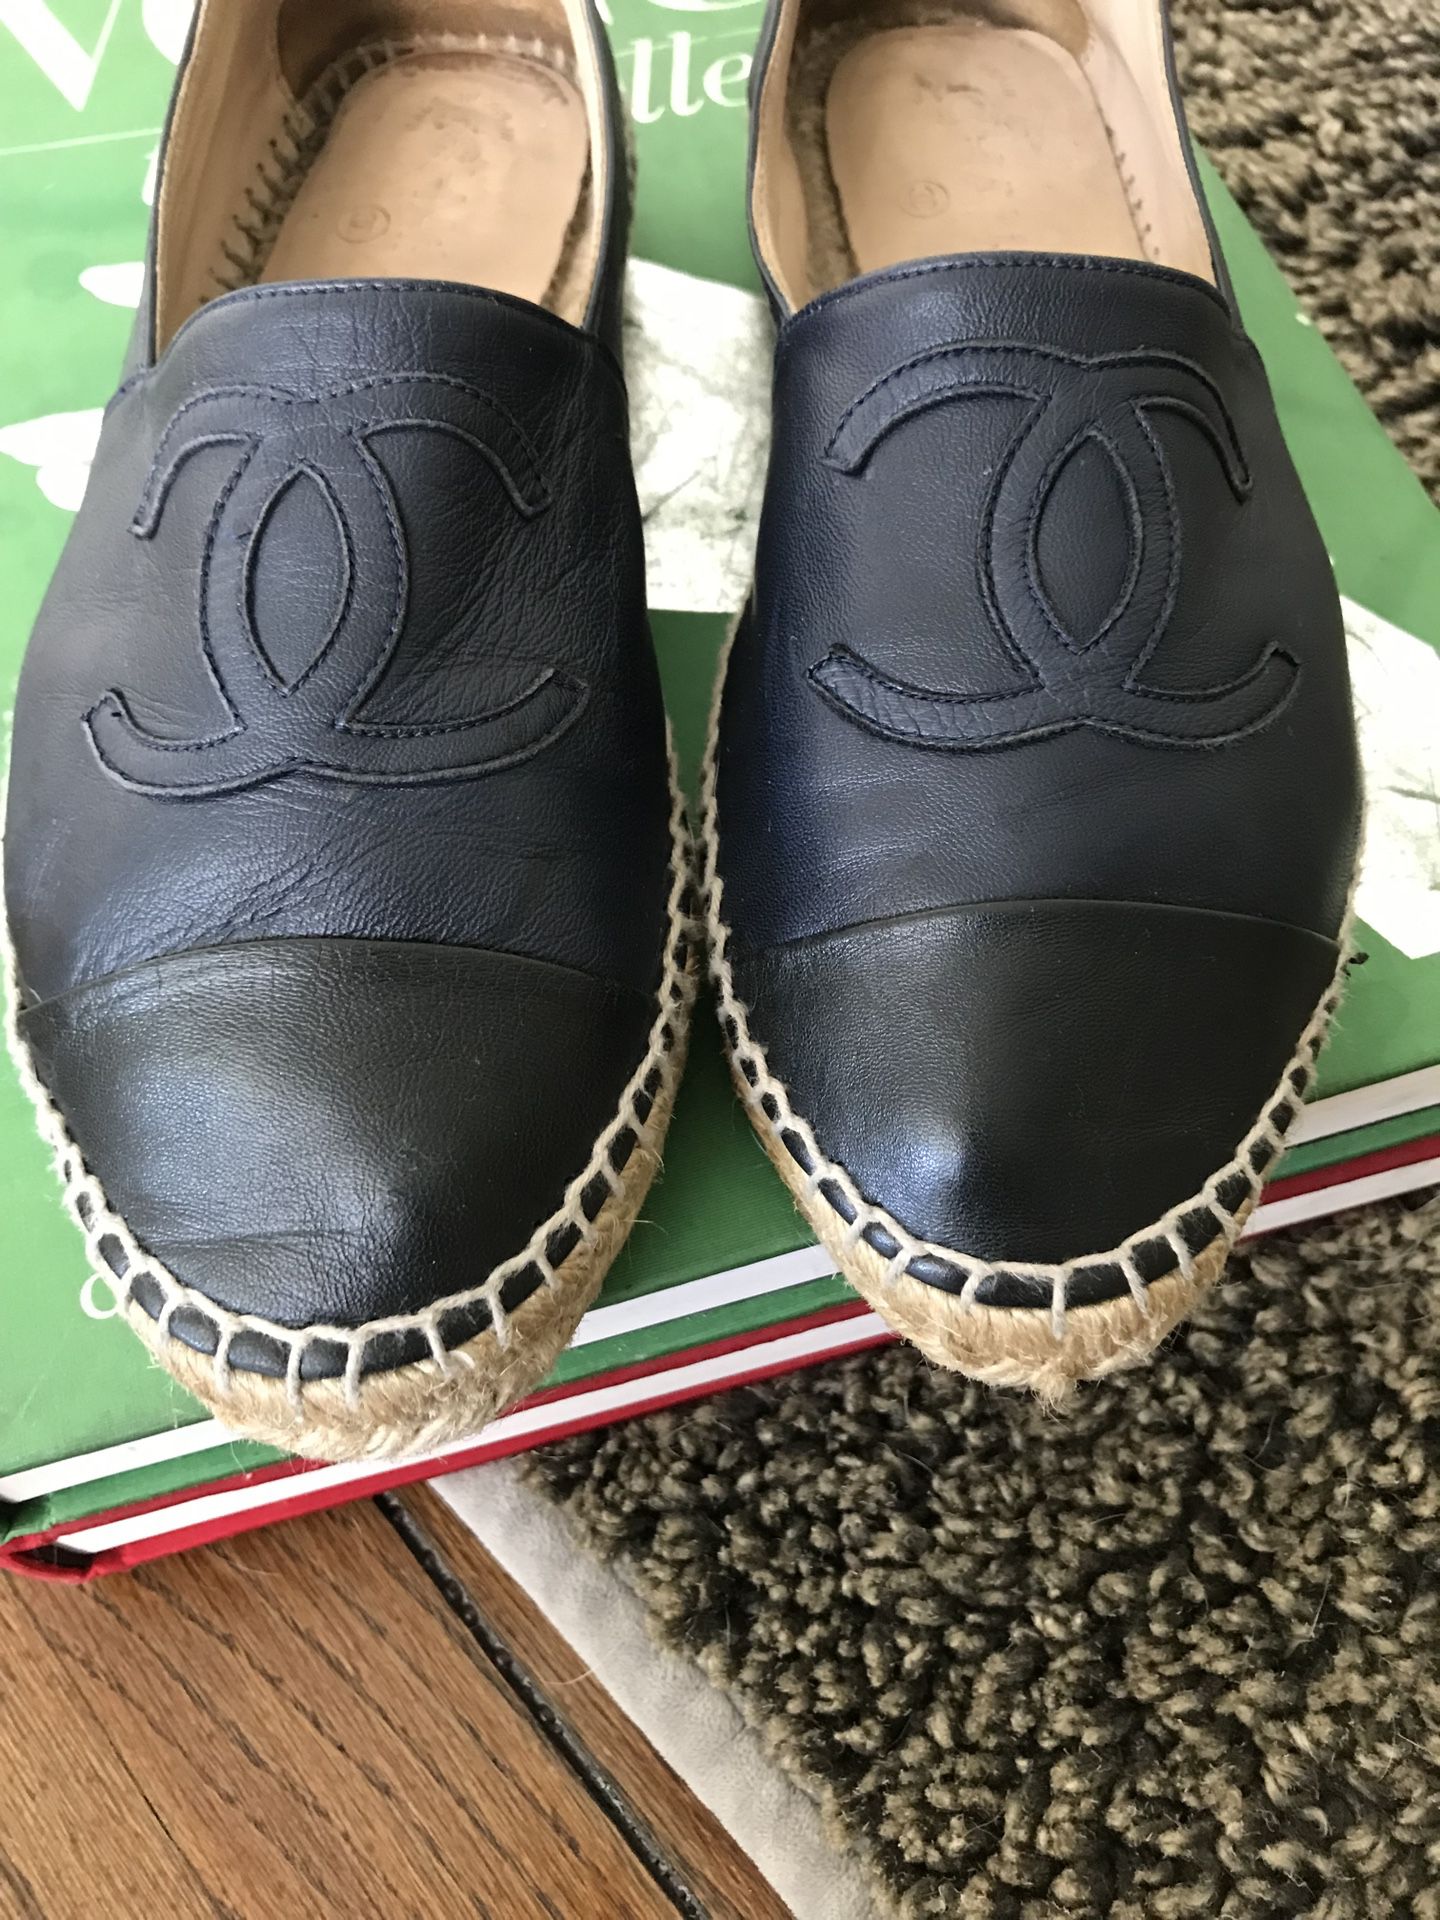 Chanel Espadrilles for Sale in Los Angeles, CA - OfferUp